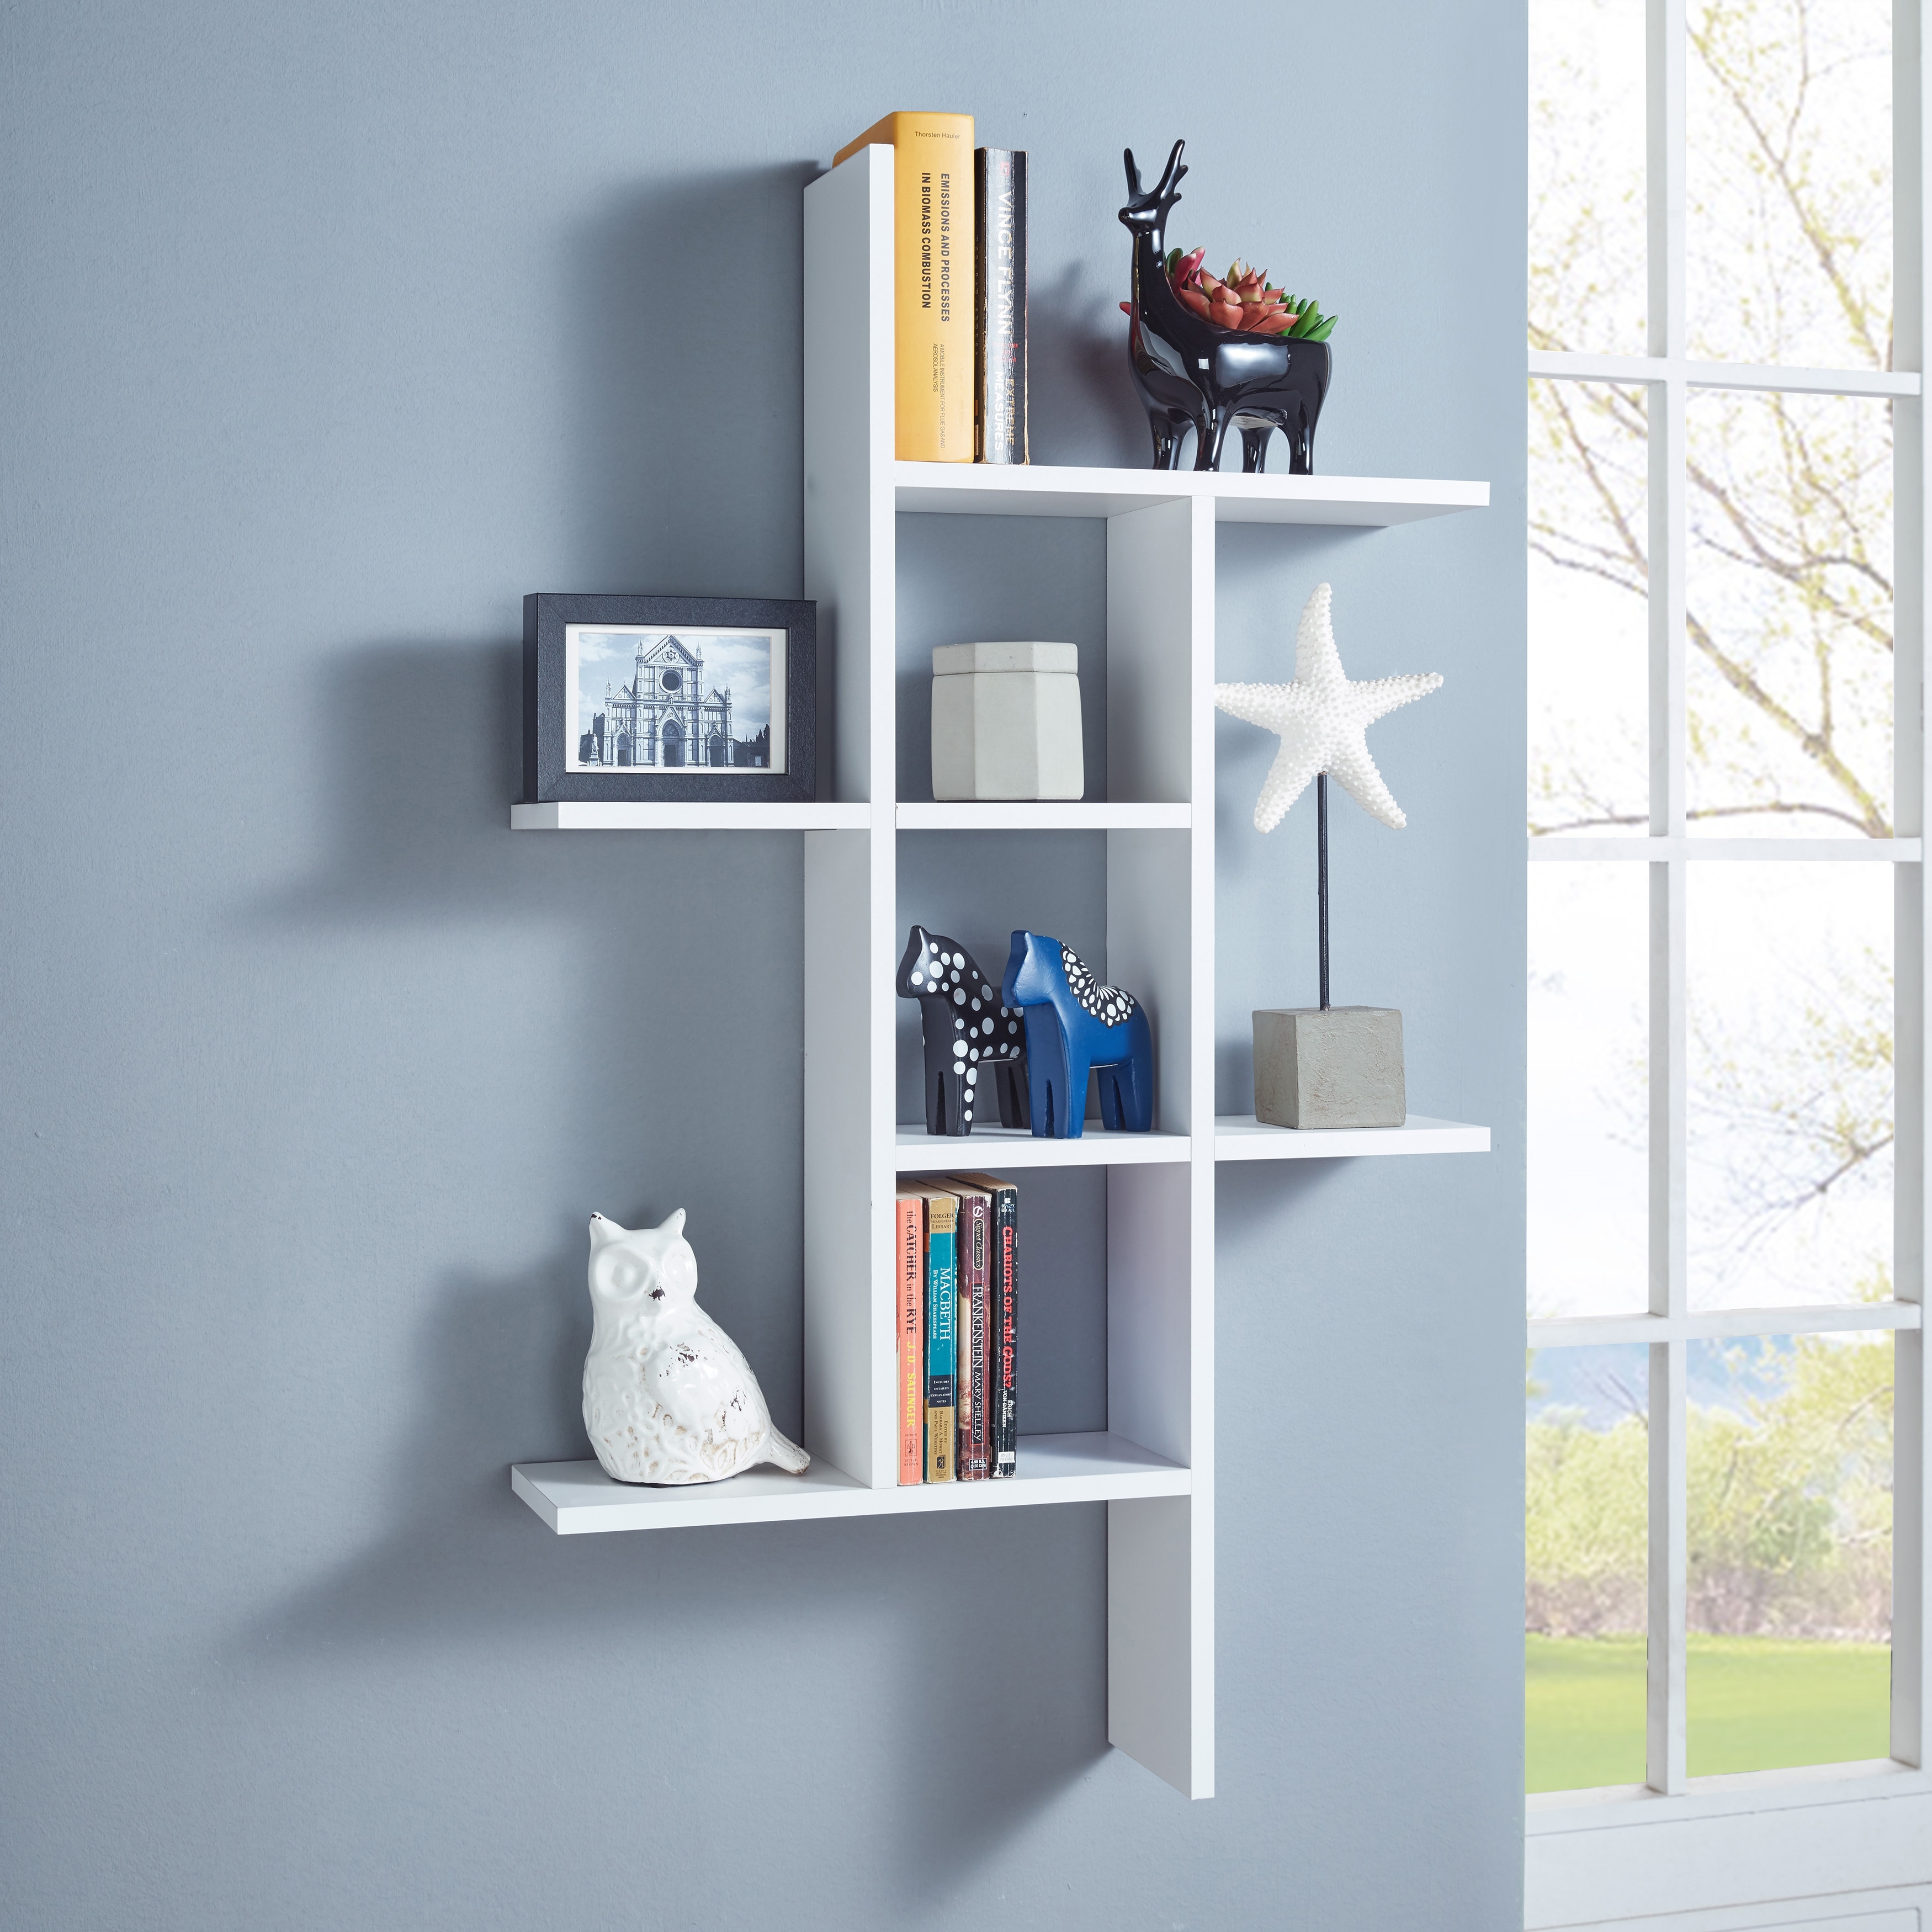 https://ak1.ostkcdn.com/images/products/is/images/direct/4046cd1851dbc5fd34a290a6ebfd14dbb4cbcc80/Danya-B.-Cantilever-Wall-Shelf---White.jpg